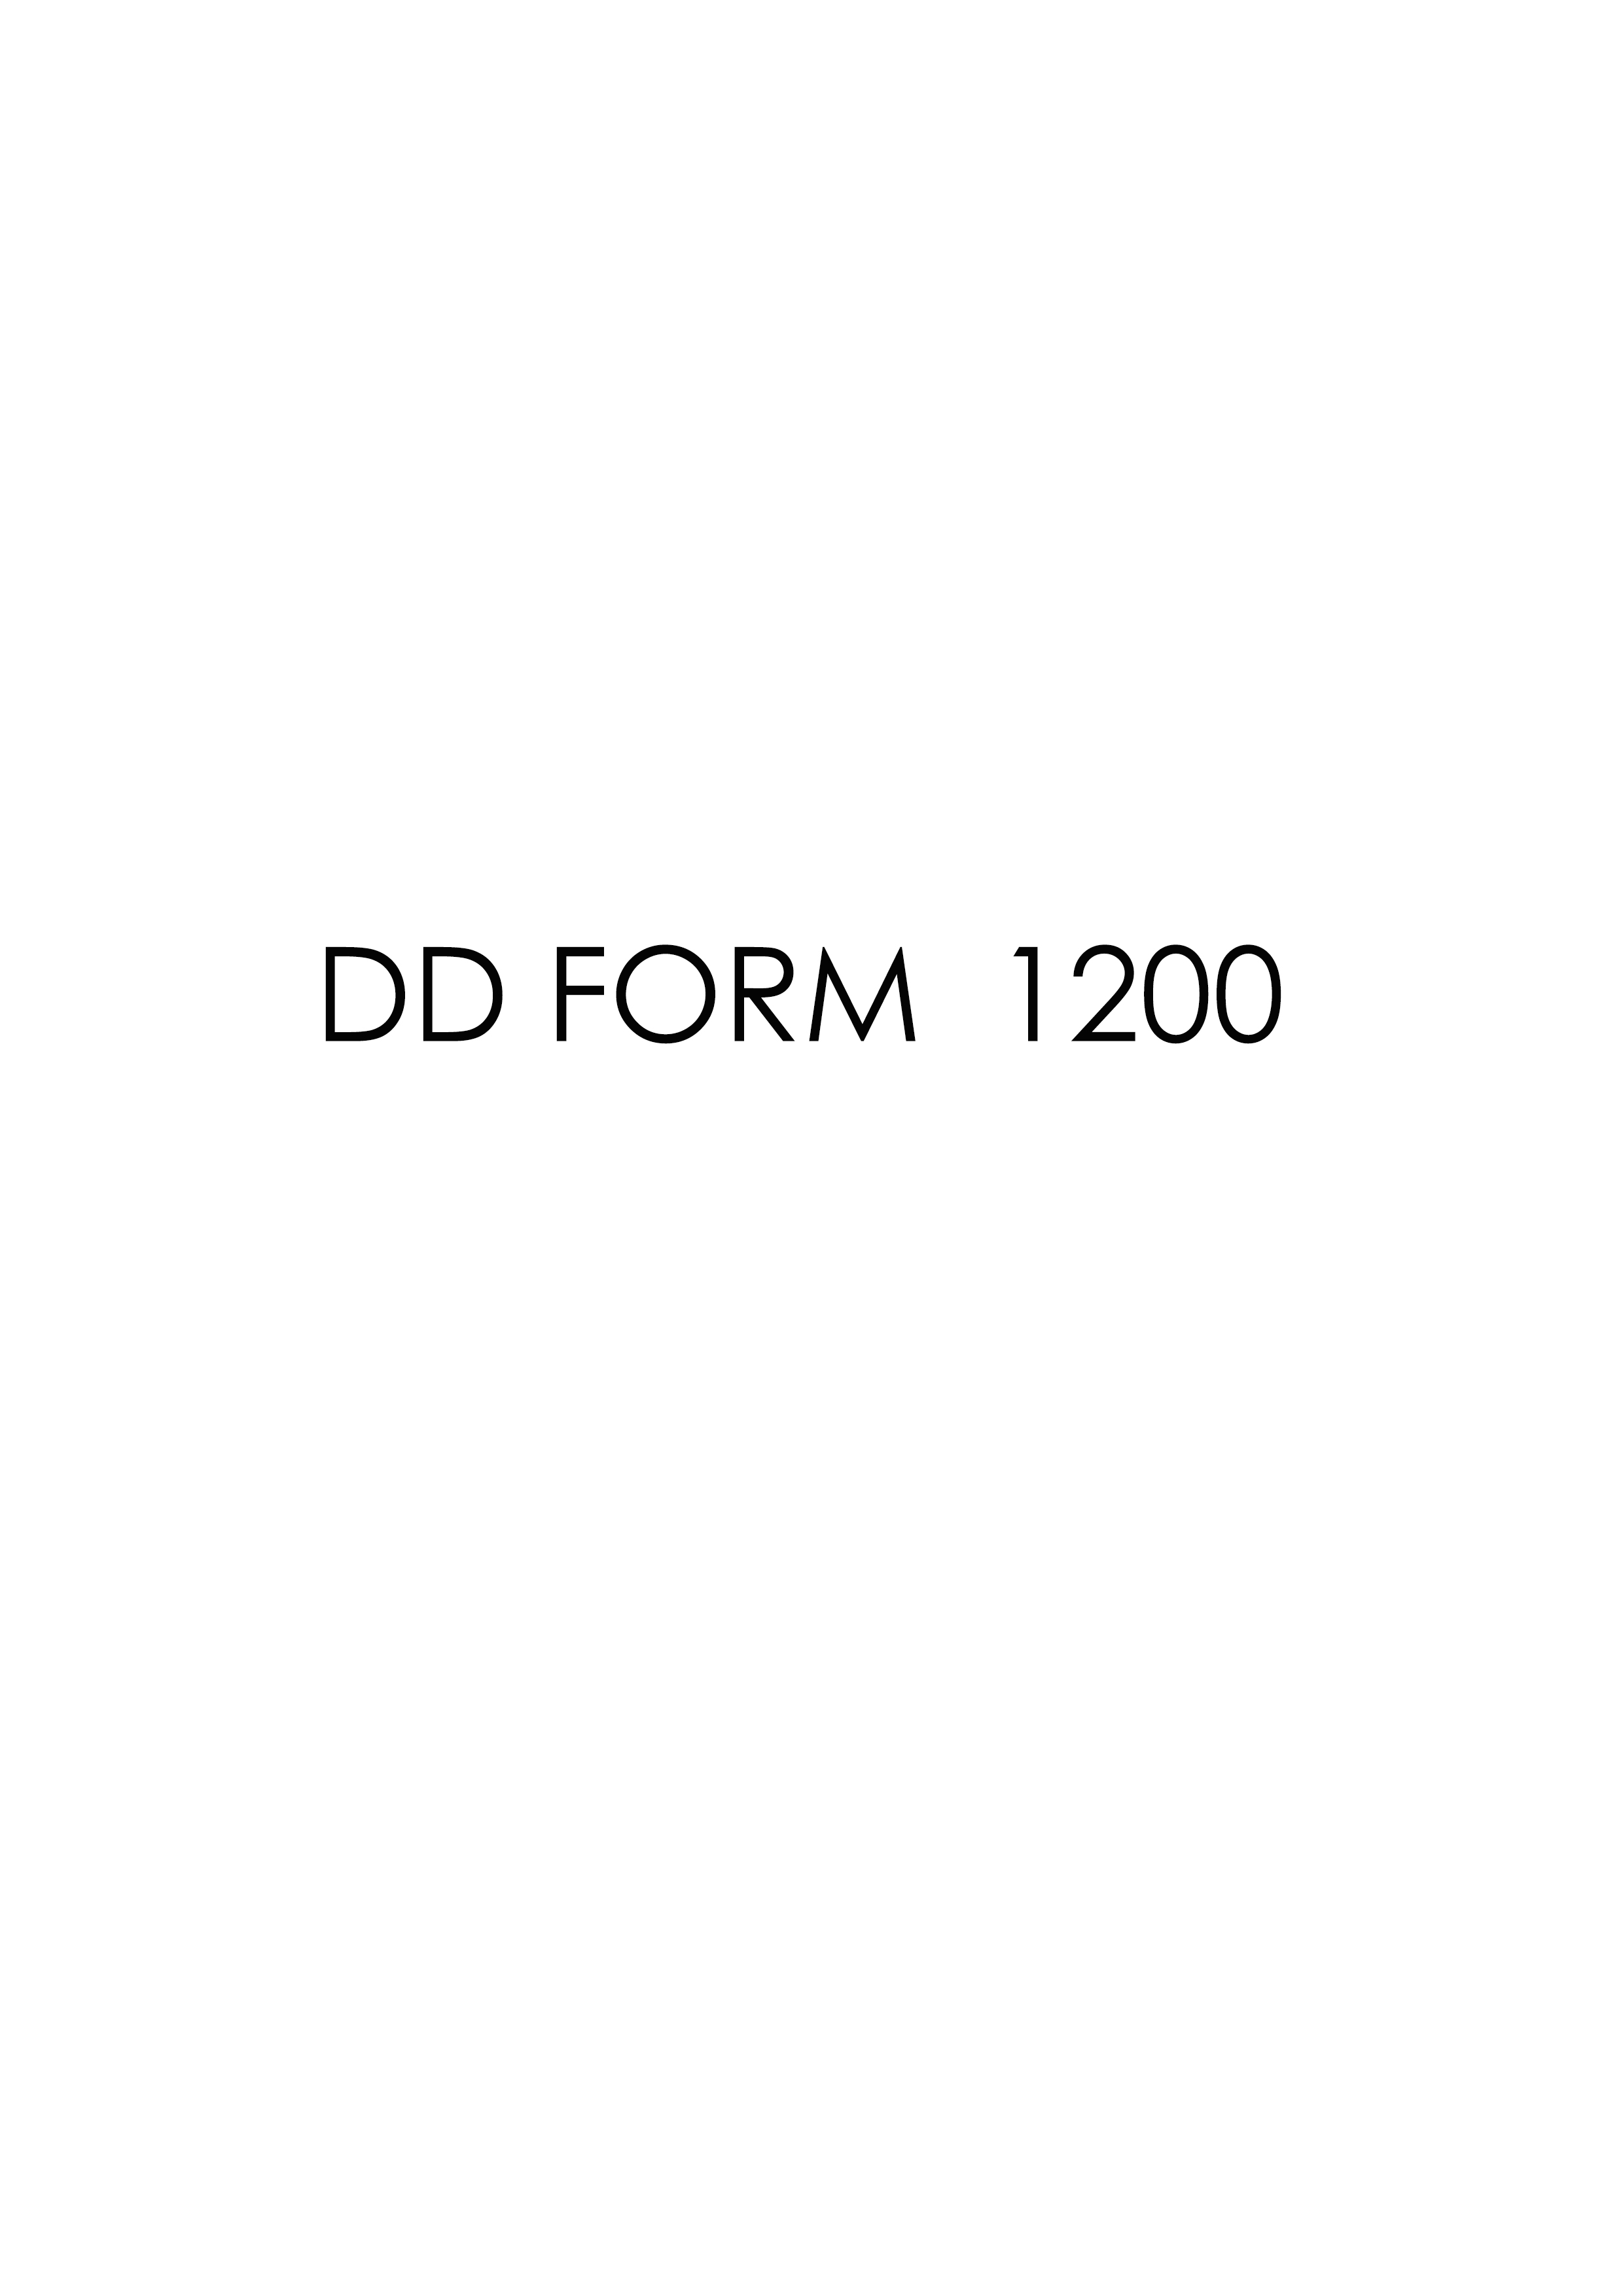 Download Fillable dd Form 1200